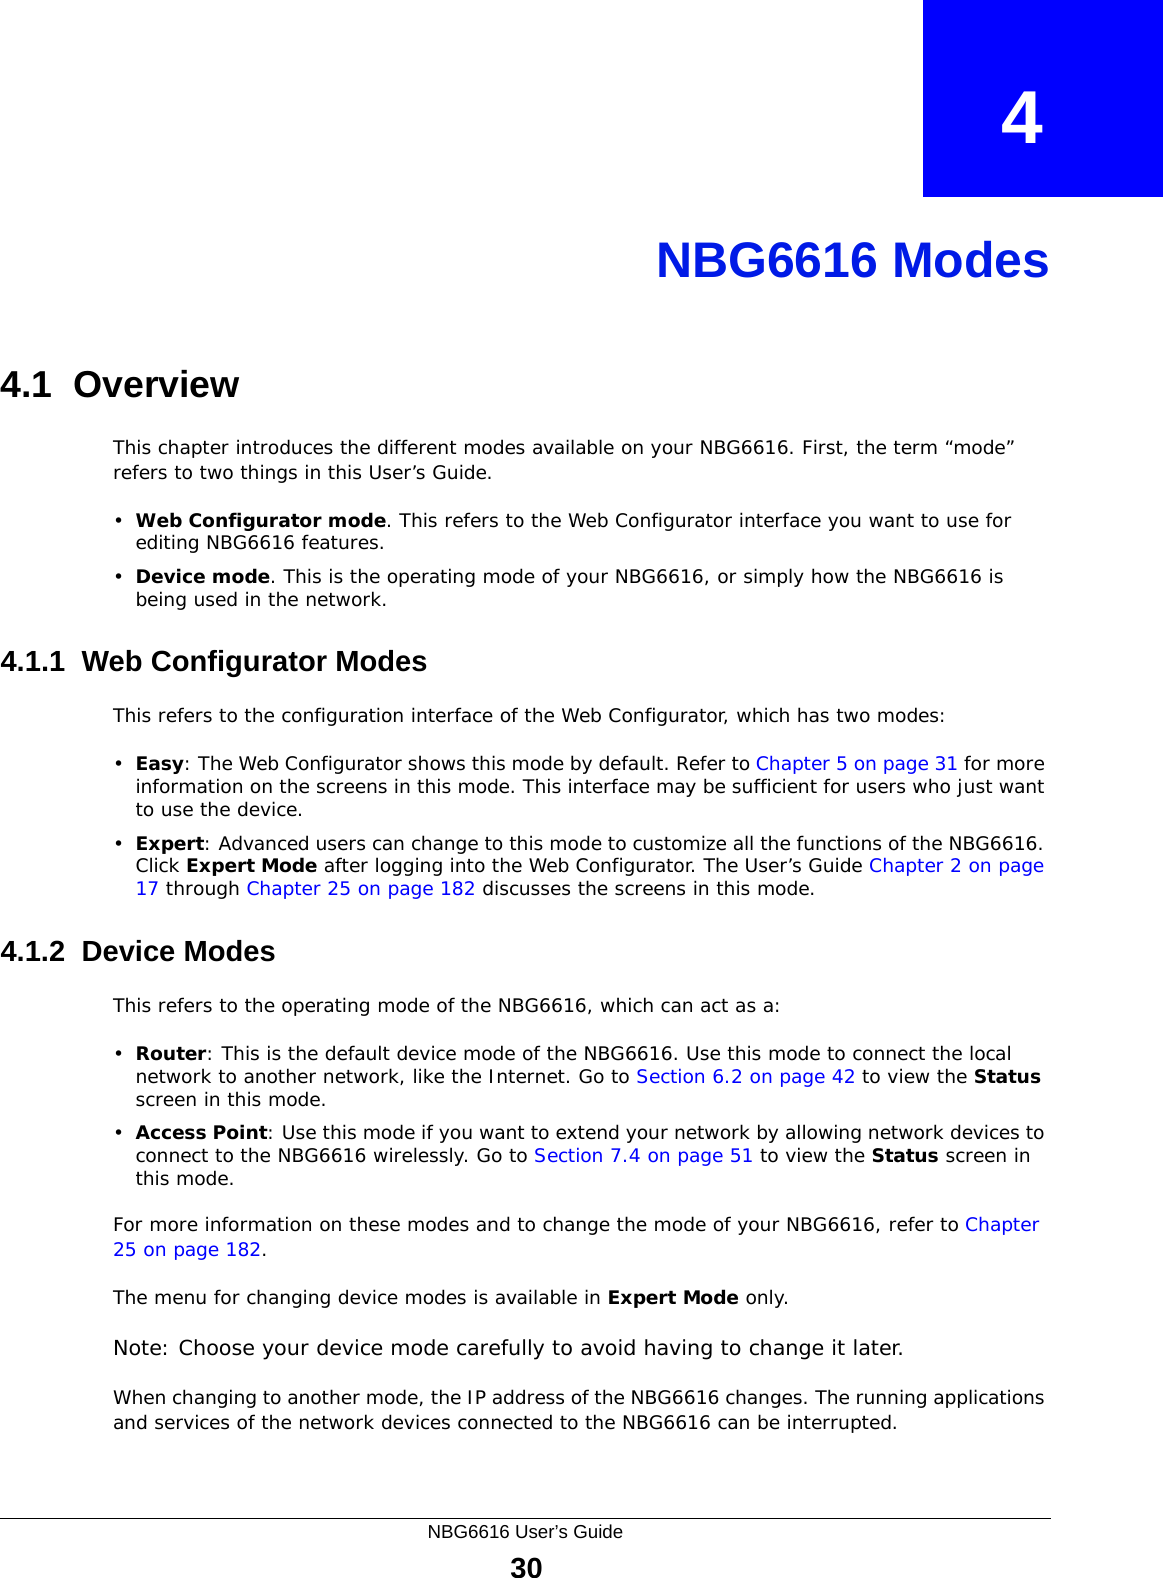 NBG6616 User’s Guide30CHAPTER   4NBG6616 Modes4.1  OverviewThis chapter introduces the different modes available on your NBG6616. First, the term “mode” refers to two things in this User’s Guide.•Web Configurator mode. This refers to the Web Configurator interface you want to use for editing NBG6616 features. •Device mode. This is the operating mode of your NBG6616, or simply how the NBG6616 is being used in the network. 4.1.1  Web Configurator ModesThis refers to the configuration interface of the Web Configurator, which has two modes:•Easy: The Web Configurator shows this mode by default. Refer to Chapter 5 on page 31 for more information on the screens in this mode. This interface may be sufficient for users who just want to use the device.•Expert: Advanced users can change to this mode to customize all the functions of the NBG6616. Click Expert Mode after logging into the Web Configurator. The User’s Guide Chapter 2 on page 17 through Chapter 25 on page 182 discusses the screens in this mode.4.1.2  Device ModesThis refers to the operating mode of the NBG6616, which can act as a:•Router: This is the default device mode of the NBG6616. Use this mode to connect the local network to another network, like the Internet. Go to Section 6.2 on page 42 to view the Status screen in this mode.•Access Point: Use this mode if you want to extend your network by allowing network devices to connect to the NBG6616 wirelessly. Go to Section 7.4 on page 51 to view the Status screen in this mode.For more information on these modes and to change the mode of your NBG6616, refer to Chapter 25 on page 182.The menu for changing device modes is available in Expert Mode only. Note: Choose your device mode carefully to avoid having to change it later.When changing to another mode, the IP address of the NBG6616 changes. The running applications and services of the network devices connected to the NBG6616 can be interrupted. 